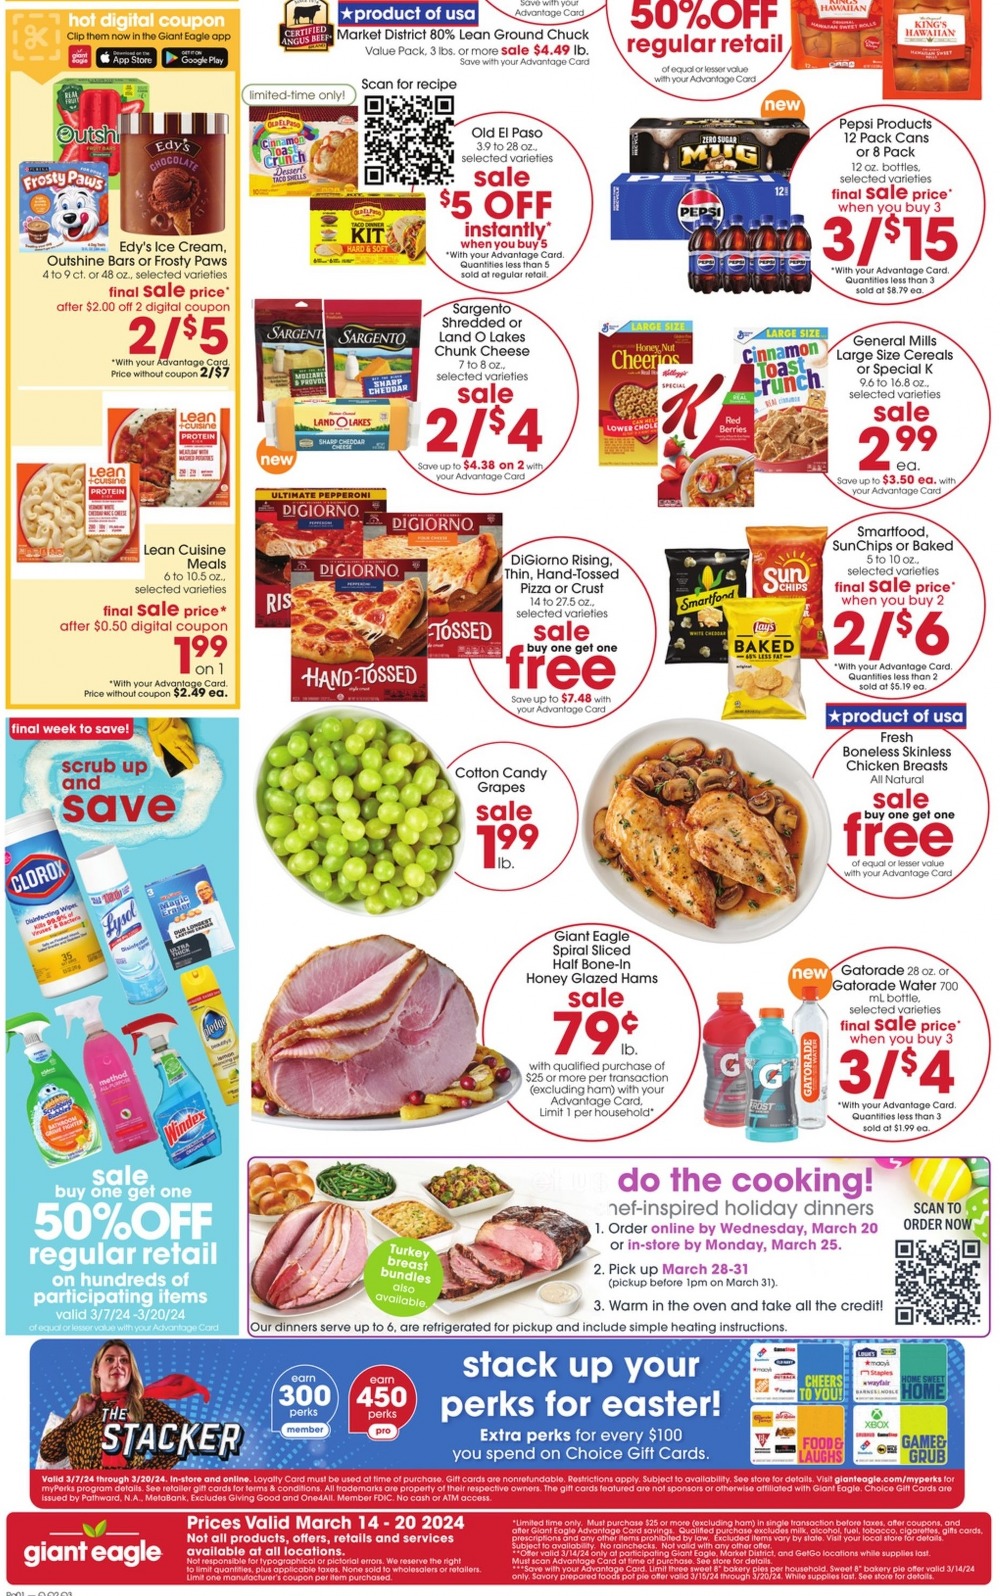 Giant Eagle Weekly Ad 4/11/24 - 4/17/24 ad preview